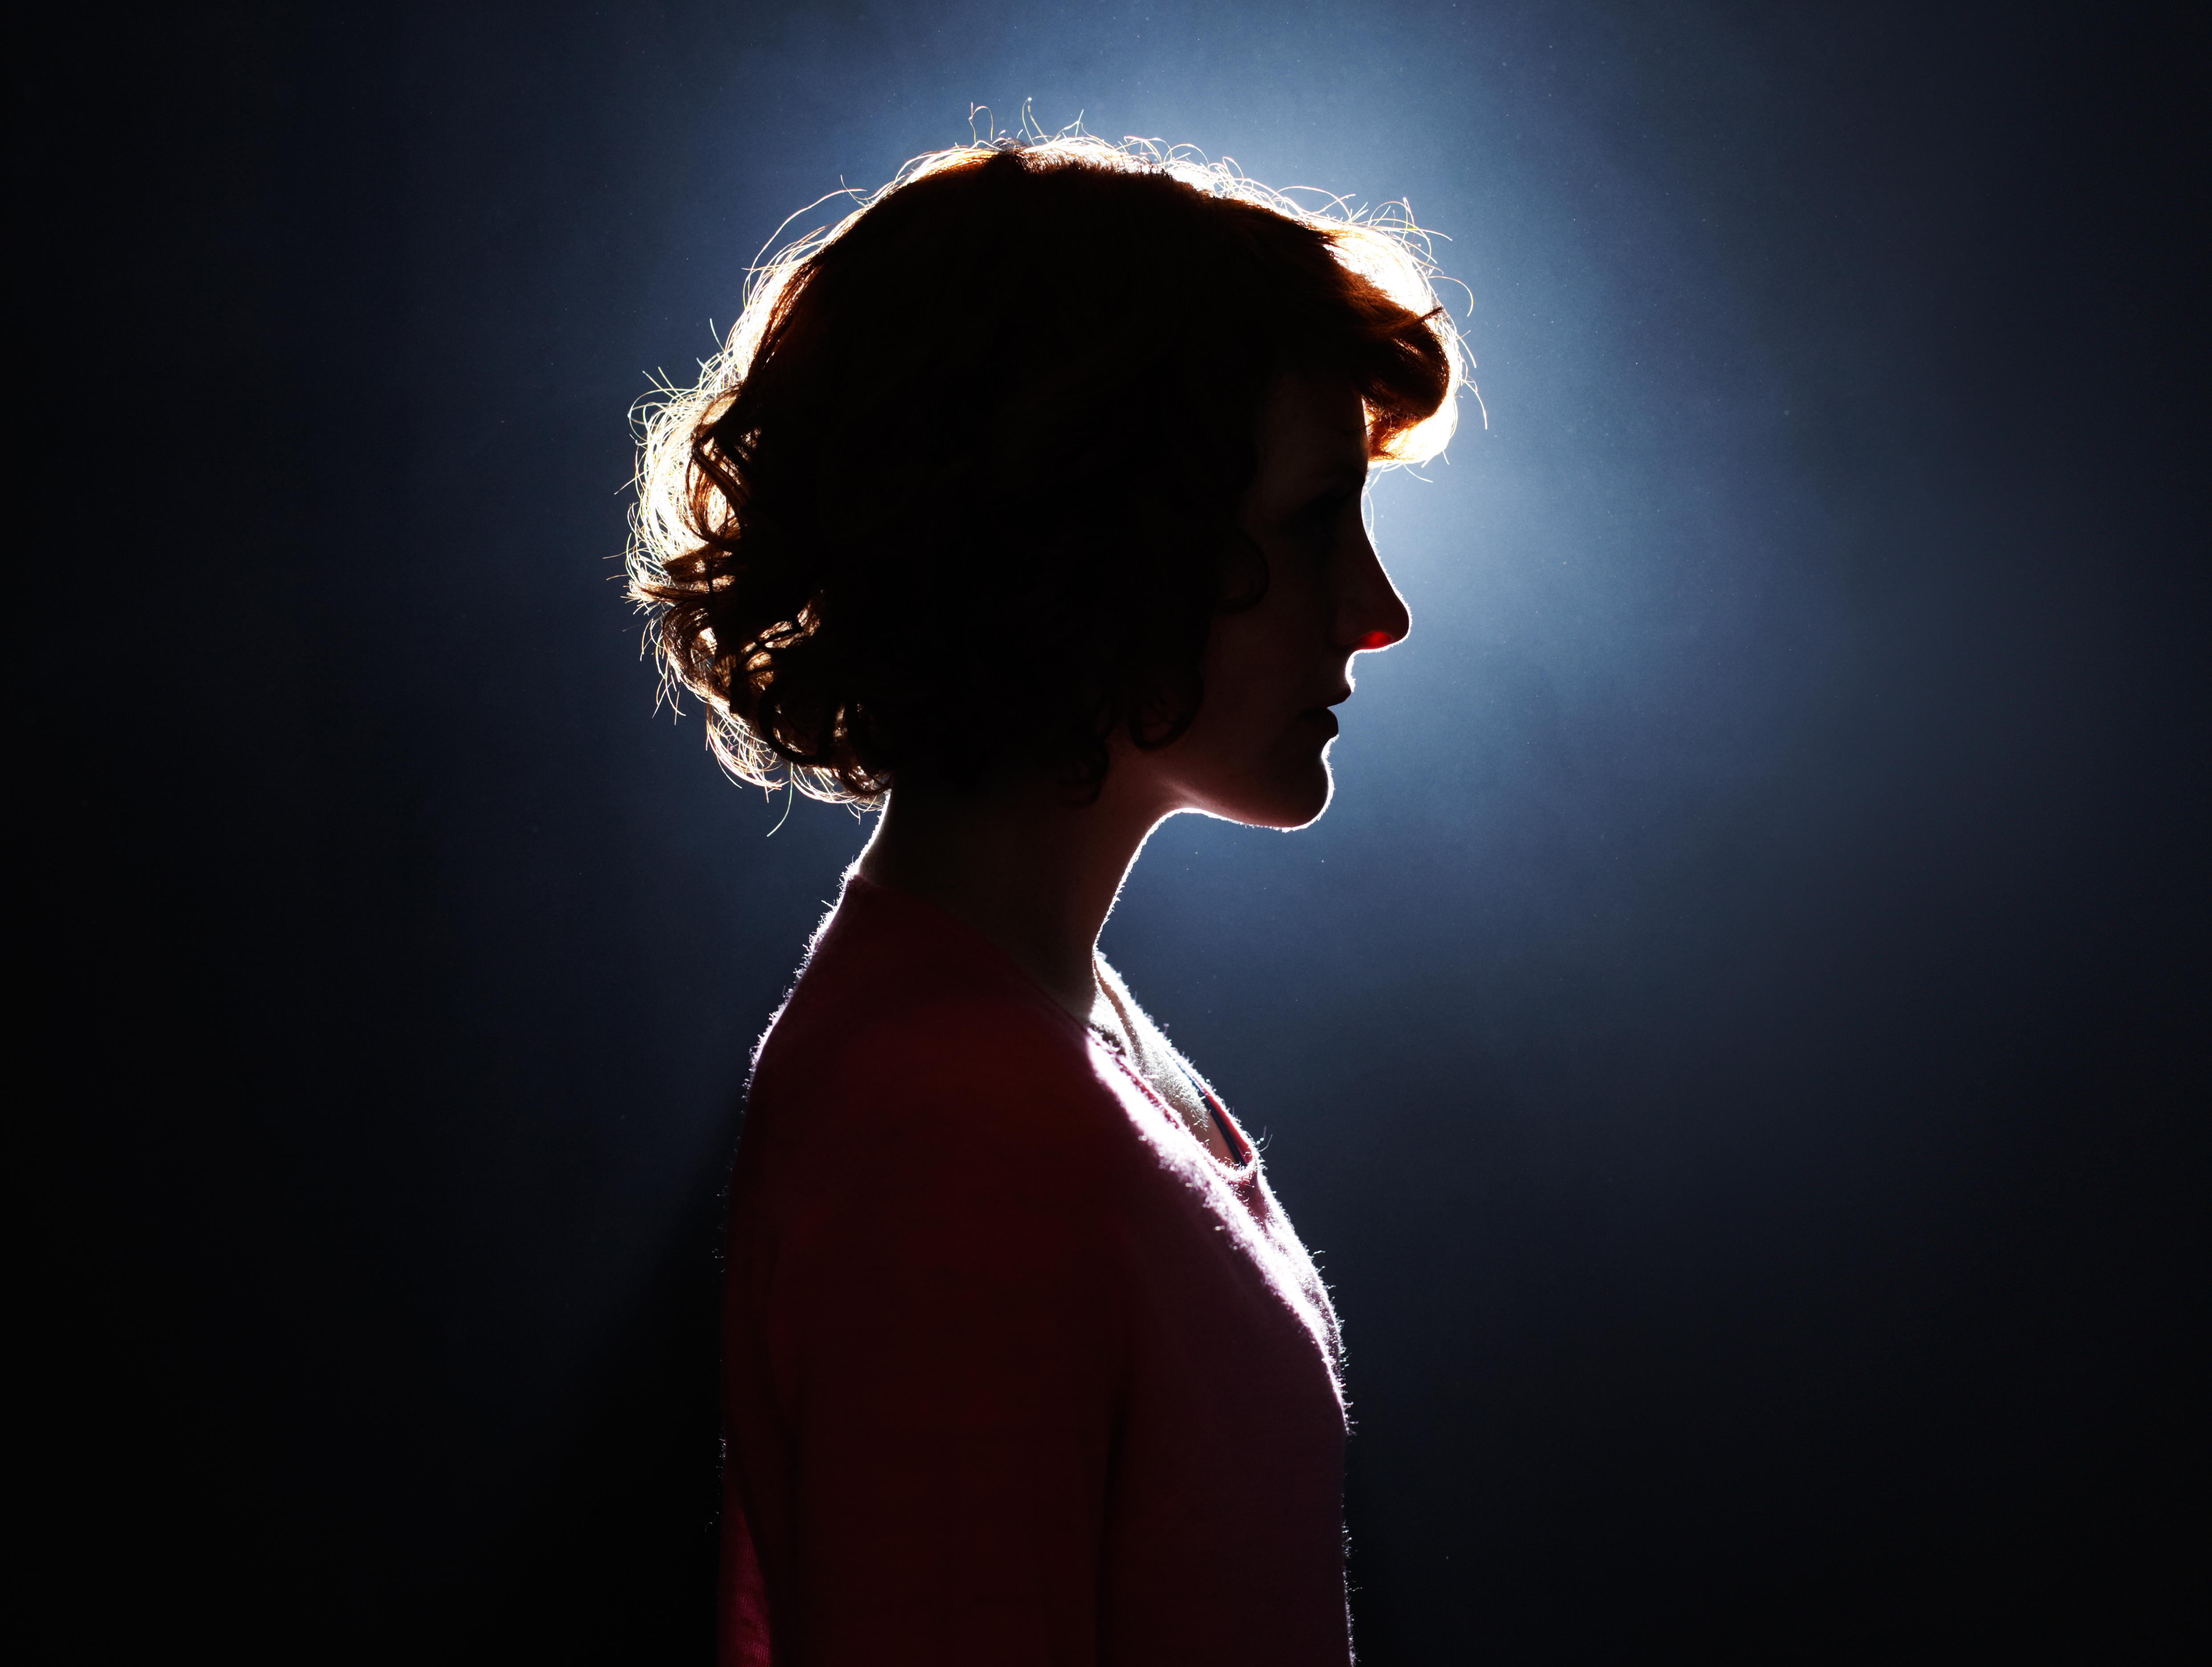 Silhouette of a young person | Source: Getty Images